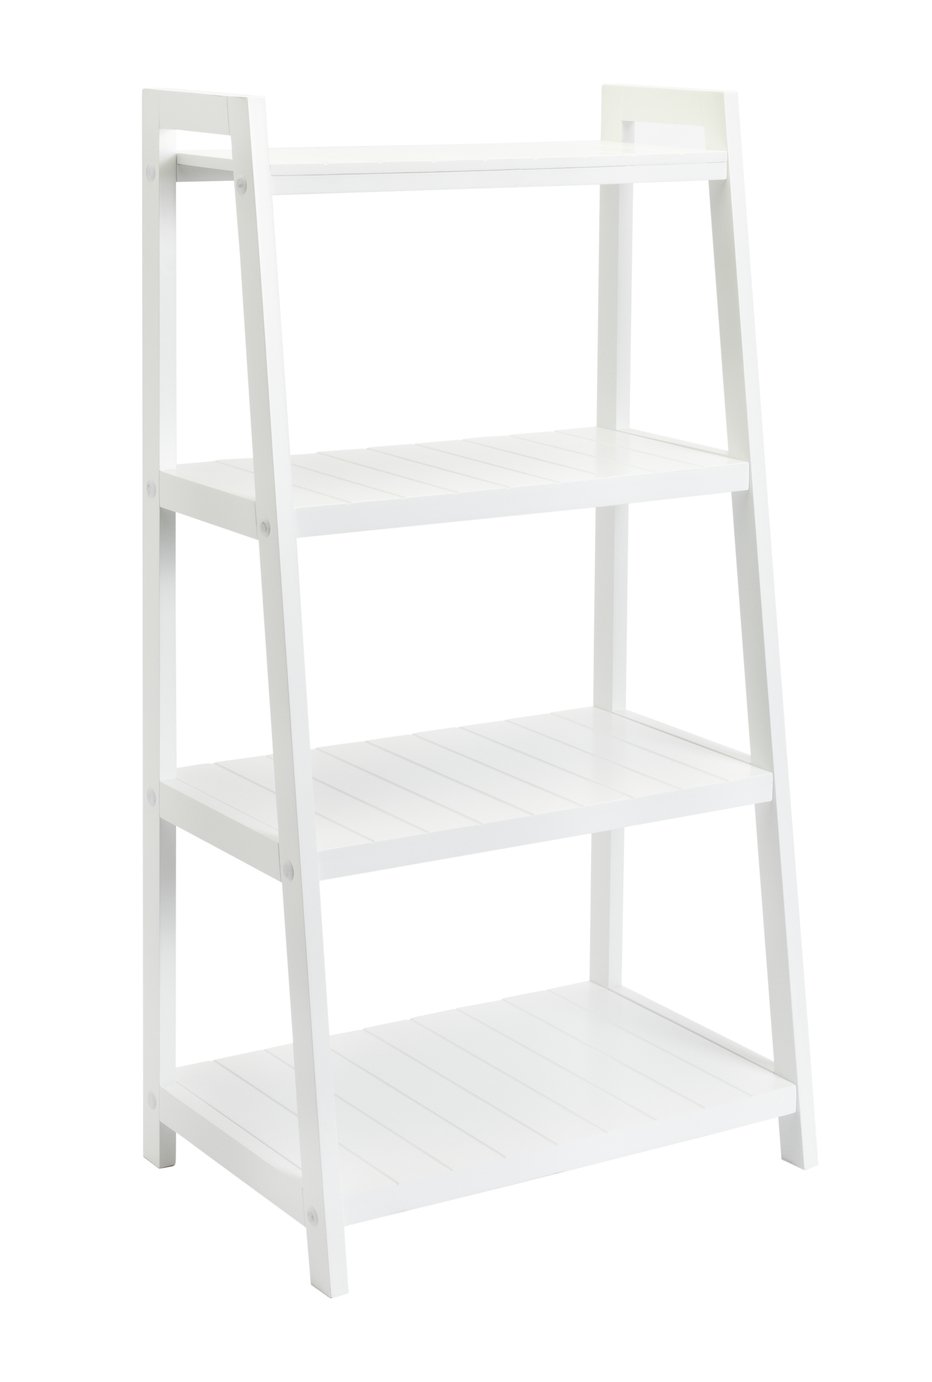 Argos Home Tongue And Groove Ladder - White